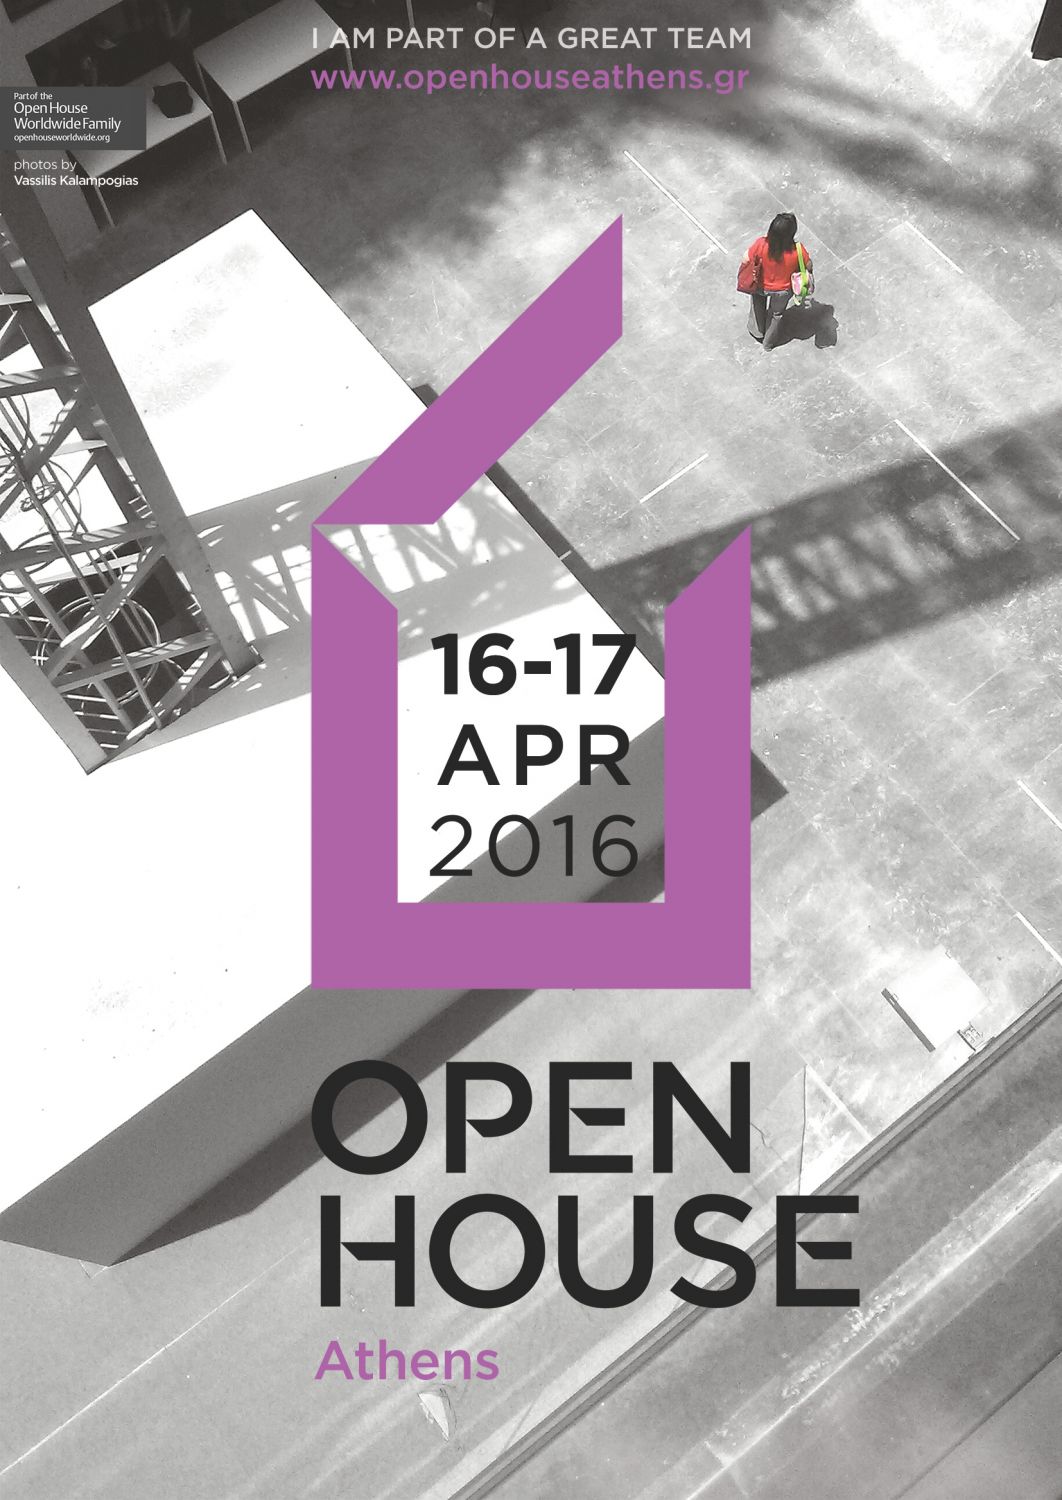 Open House Athens